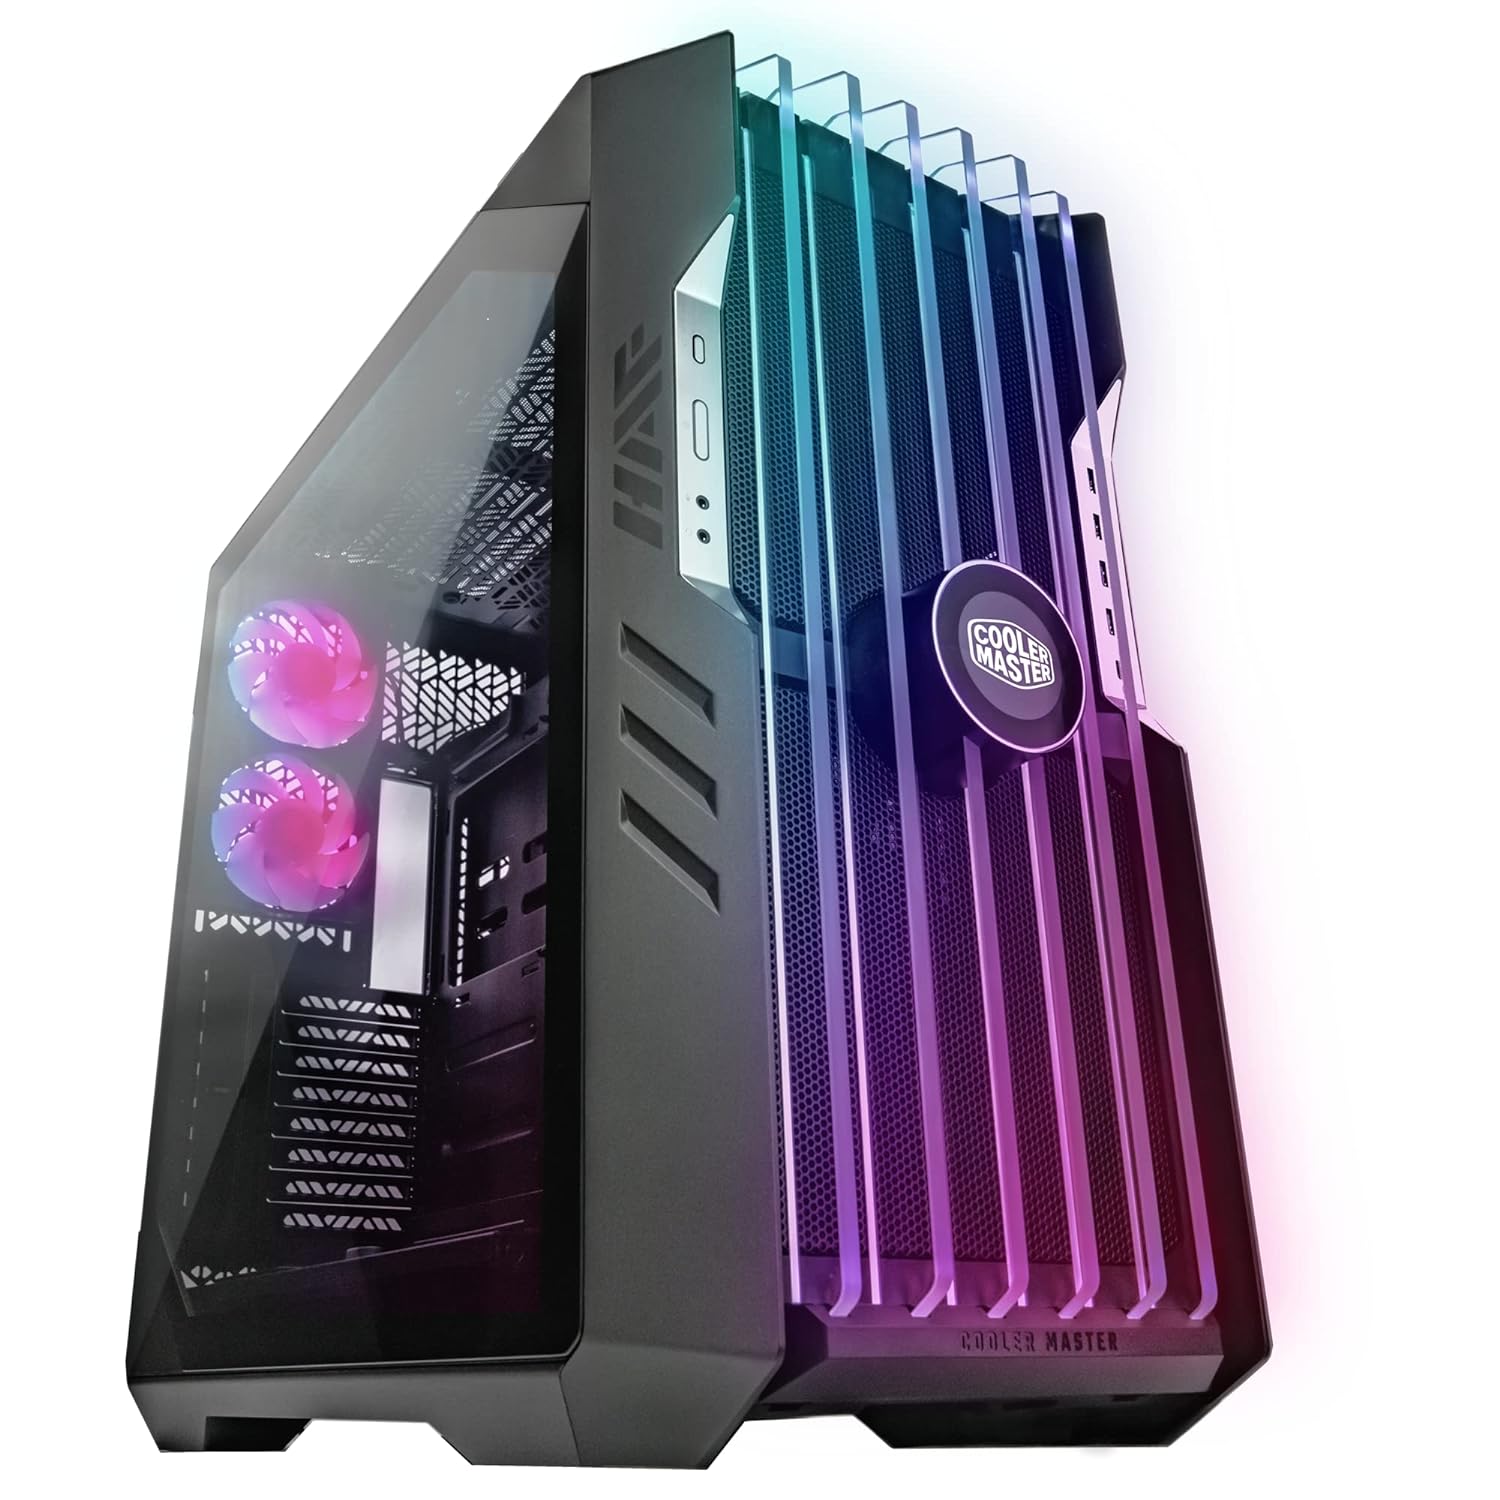 Cooler Master HAF 700 EVO E-ATX High Airflow PC Case with IRIS Customizable LCD .Breathable TG Front Panel, 200mm Sickleflow …